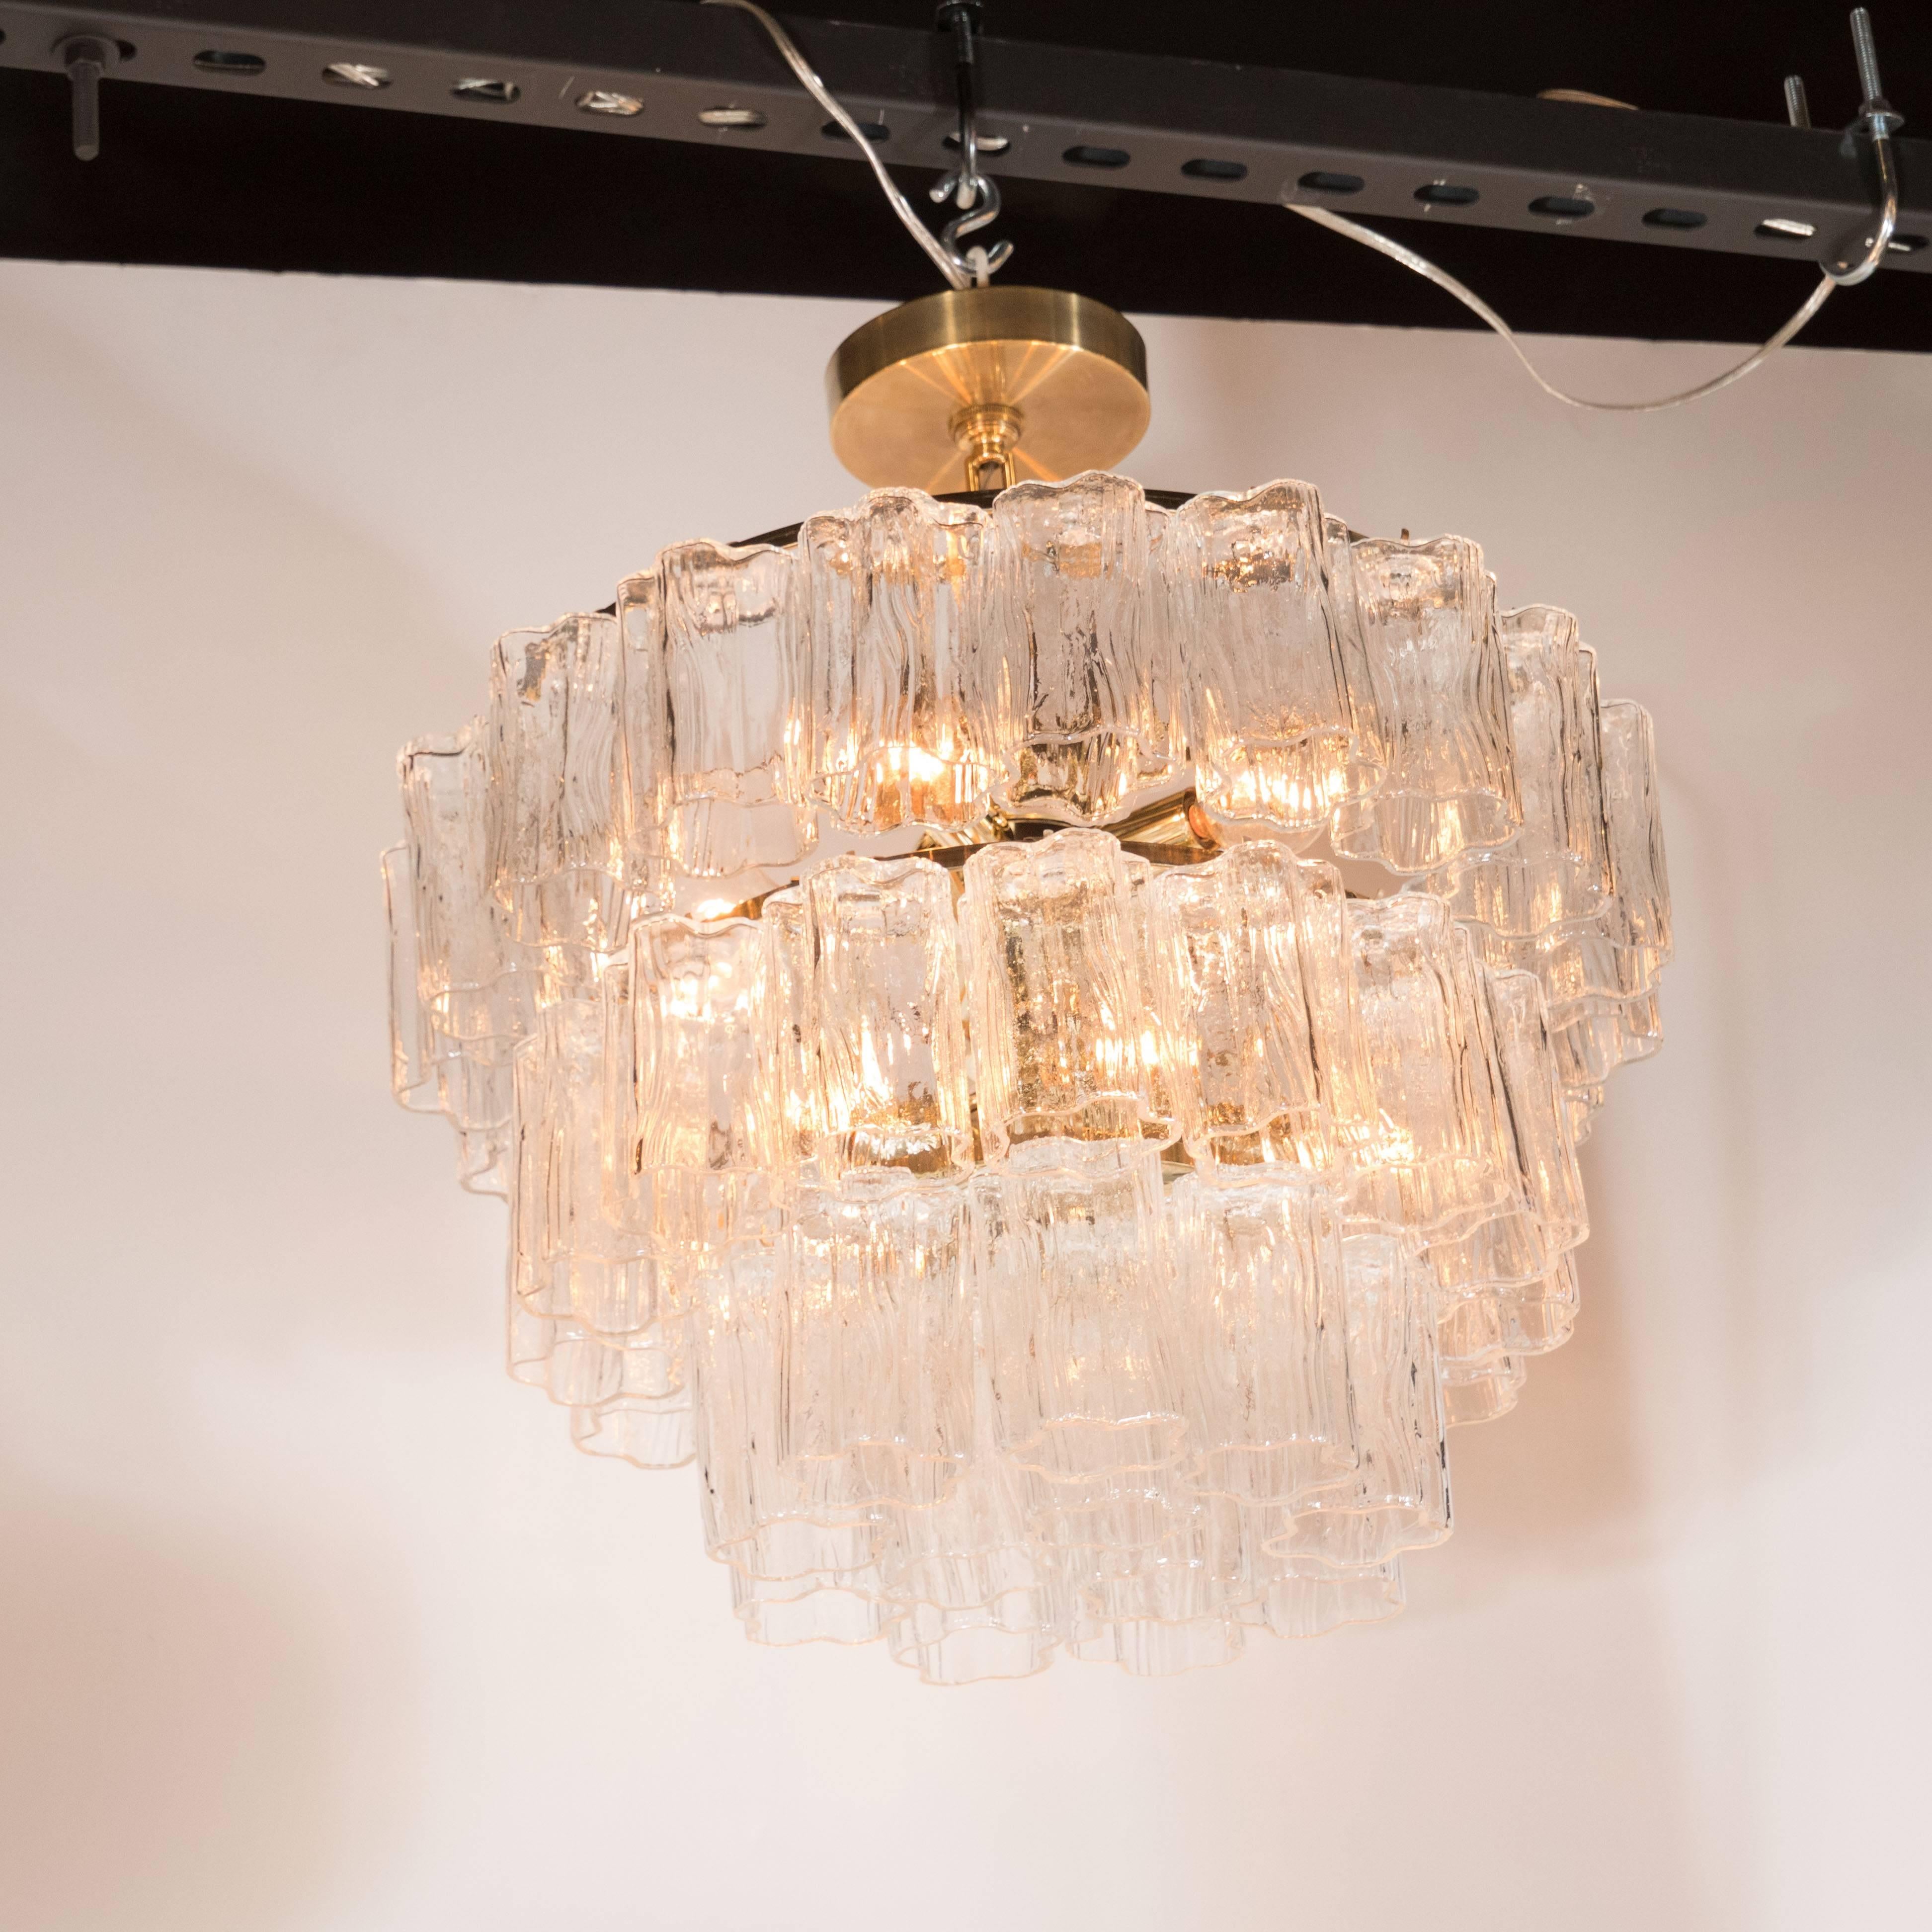 A Mid-Century Modernist three-tier Murano glass tronchi chandelier with brass fittings. Three tiers of cascading, independently hung tronchi pieces surround a polished brass frame. This fixture is fitted with six standard candelabra-style sockets,